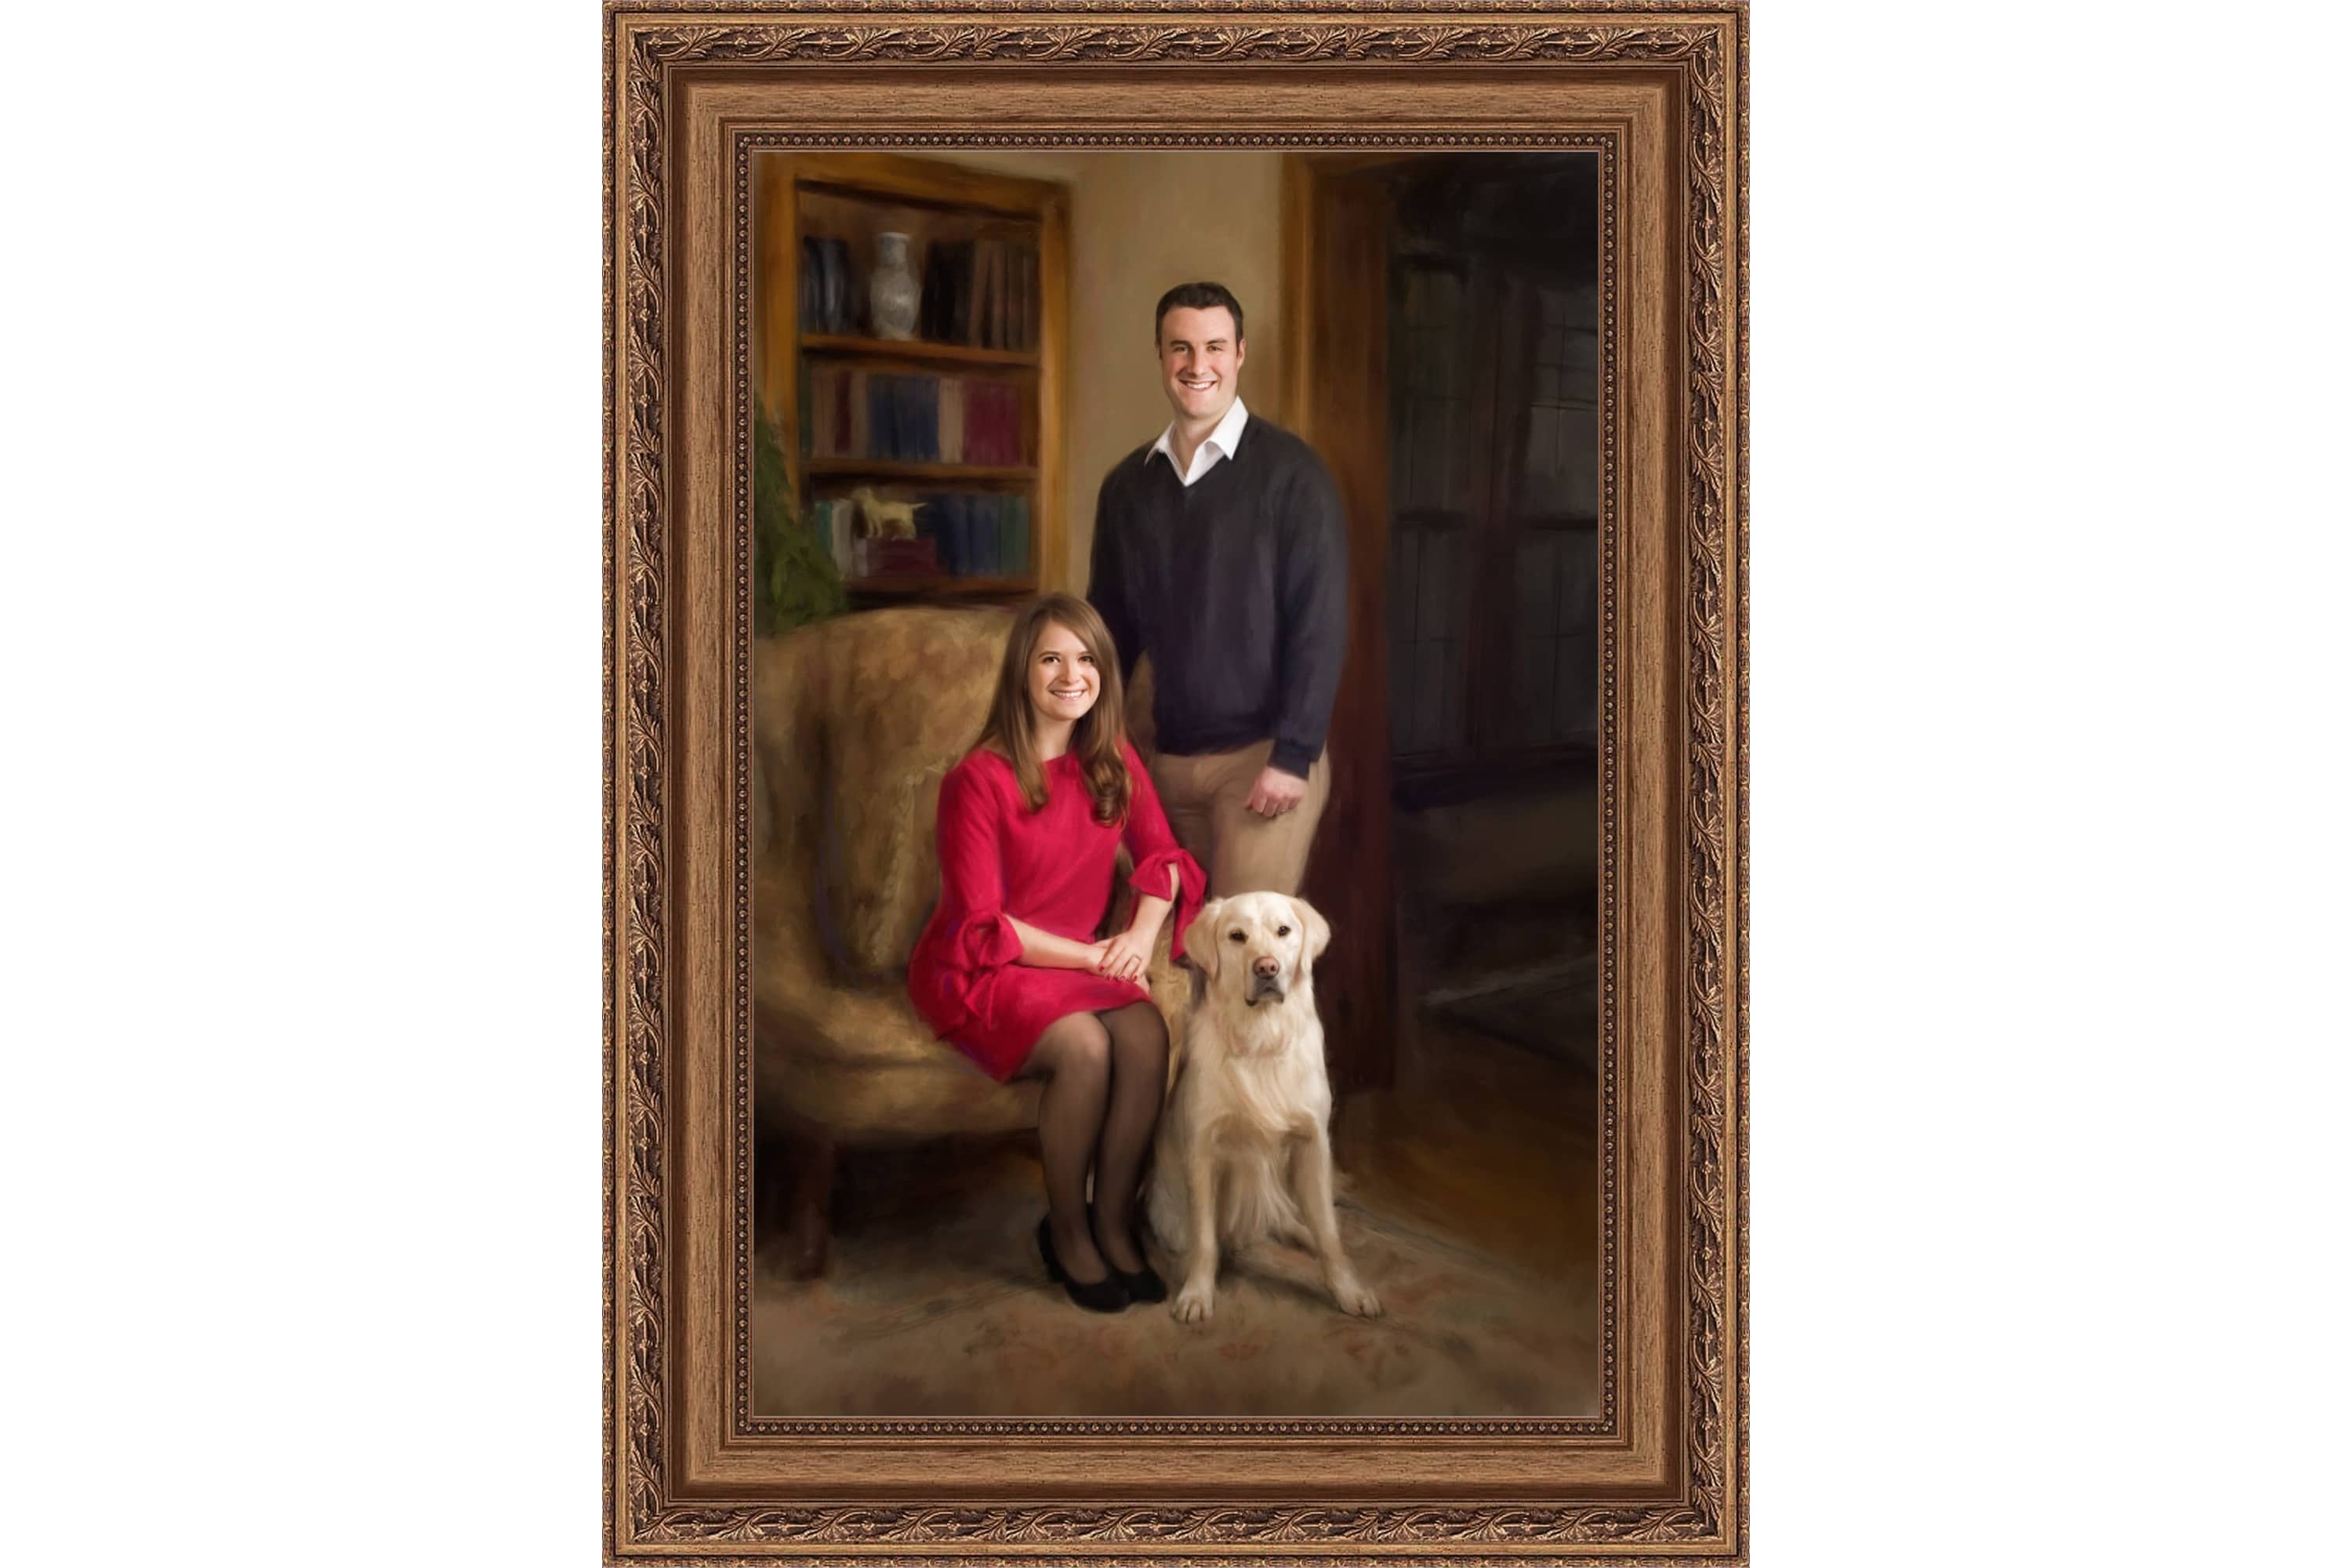 Framed portrait of a man, woman, and dog in the style of a painting